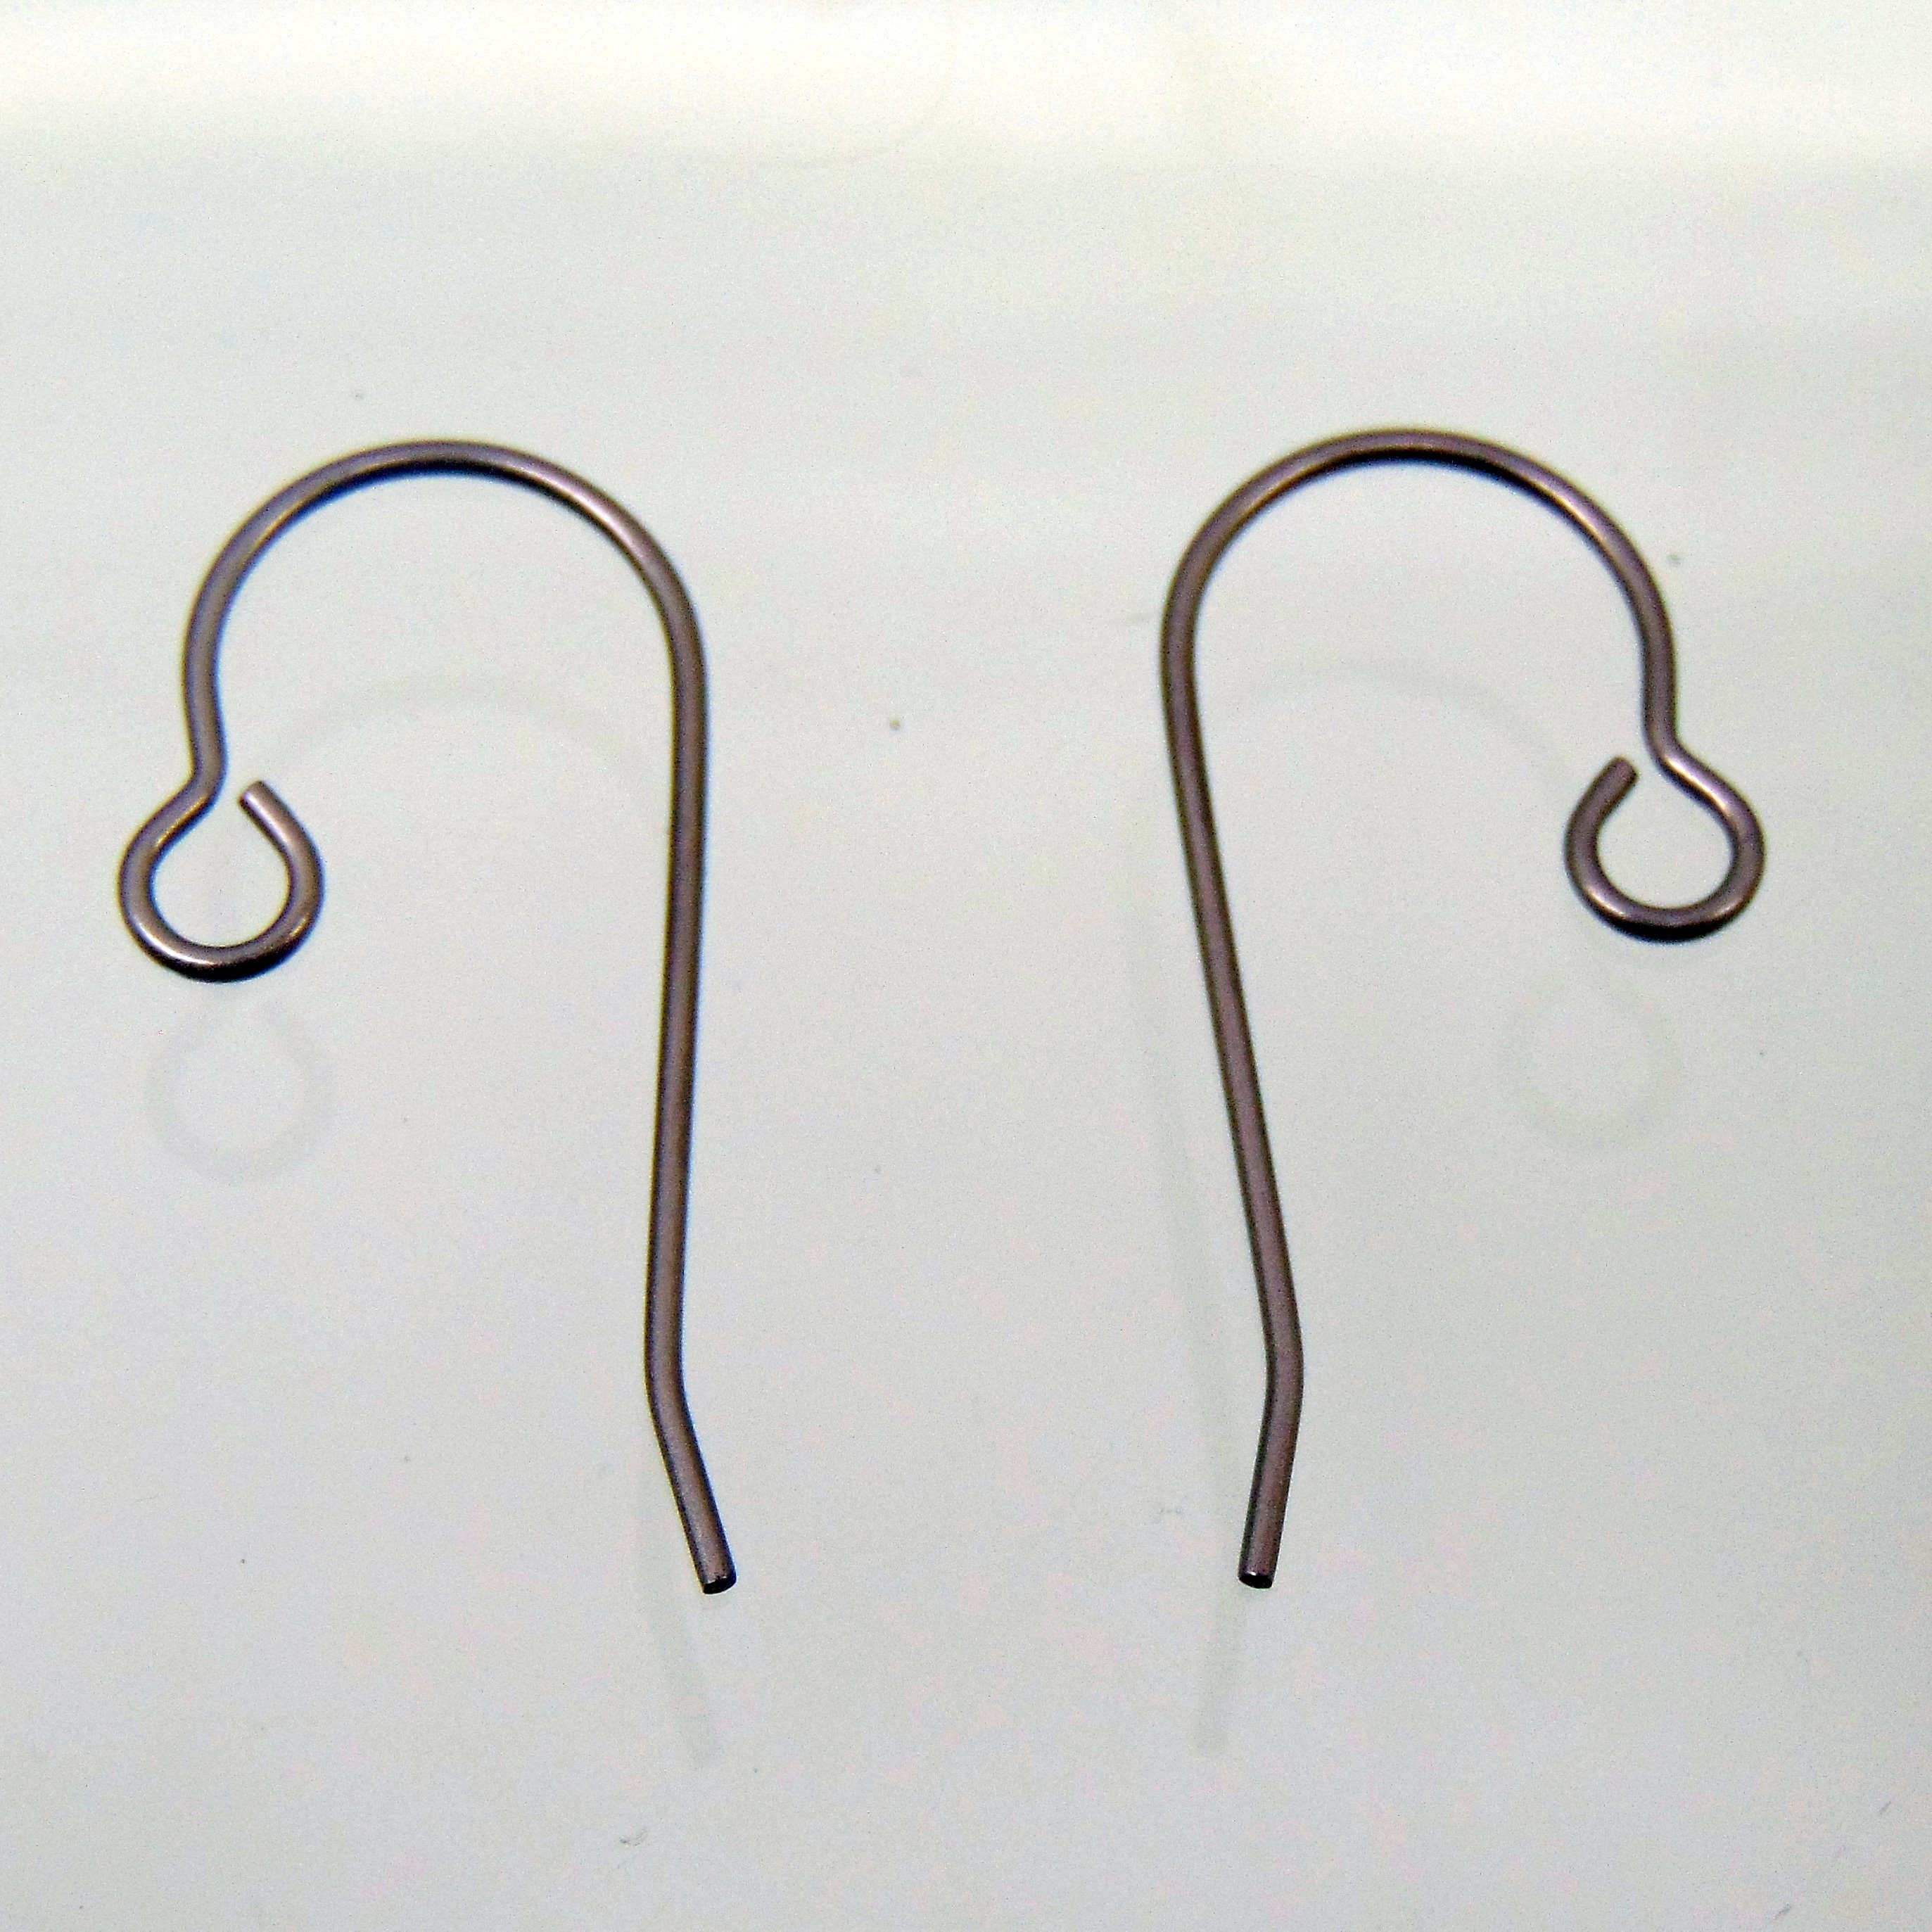 Limerencia Nickel Free Titanium French Hooks Earring Findings, Earring  Making Kit Includes 10pcs French Earring Hooks Ear Wire and 20pcs Earring  Backs